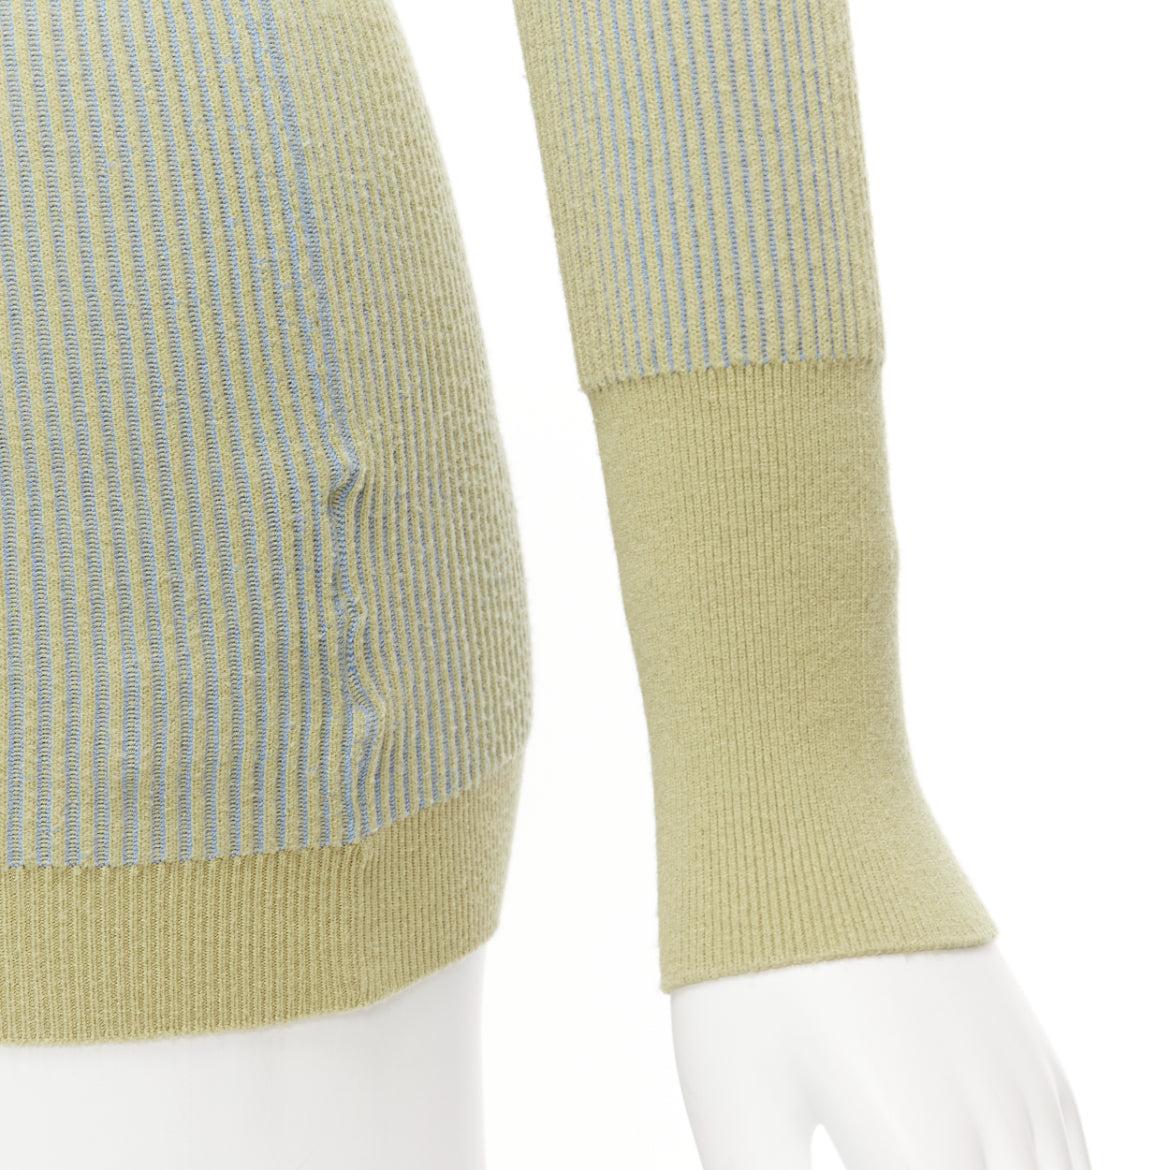 JACQUEMUS Rosa green blue ribbed scoop neck fitted long sleeve top FR40 L
Reference: CNPG/A00063
Brand: Jacquemus
Model: Rosa
Collection: SS2020
Material: Viscose, Blend
Color: Green, Blue
Pattern: Solid
Closure: Pullover
Made in: